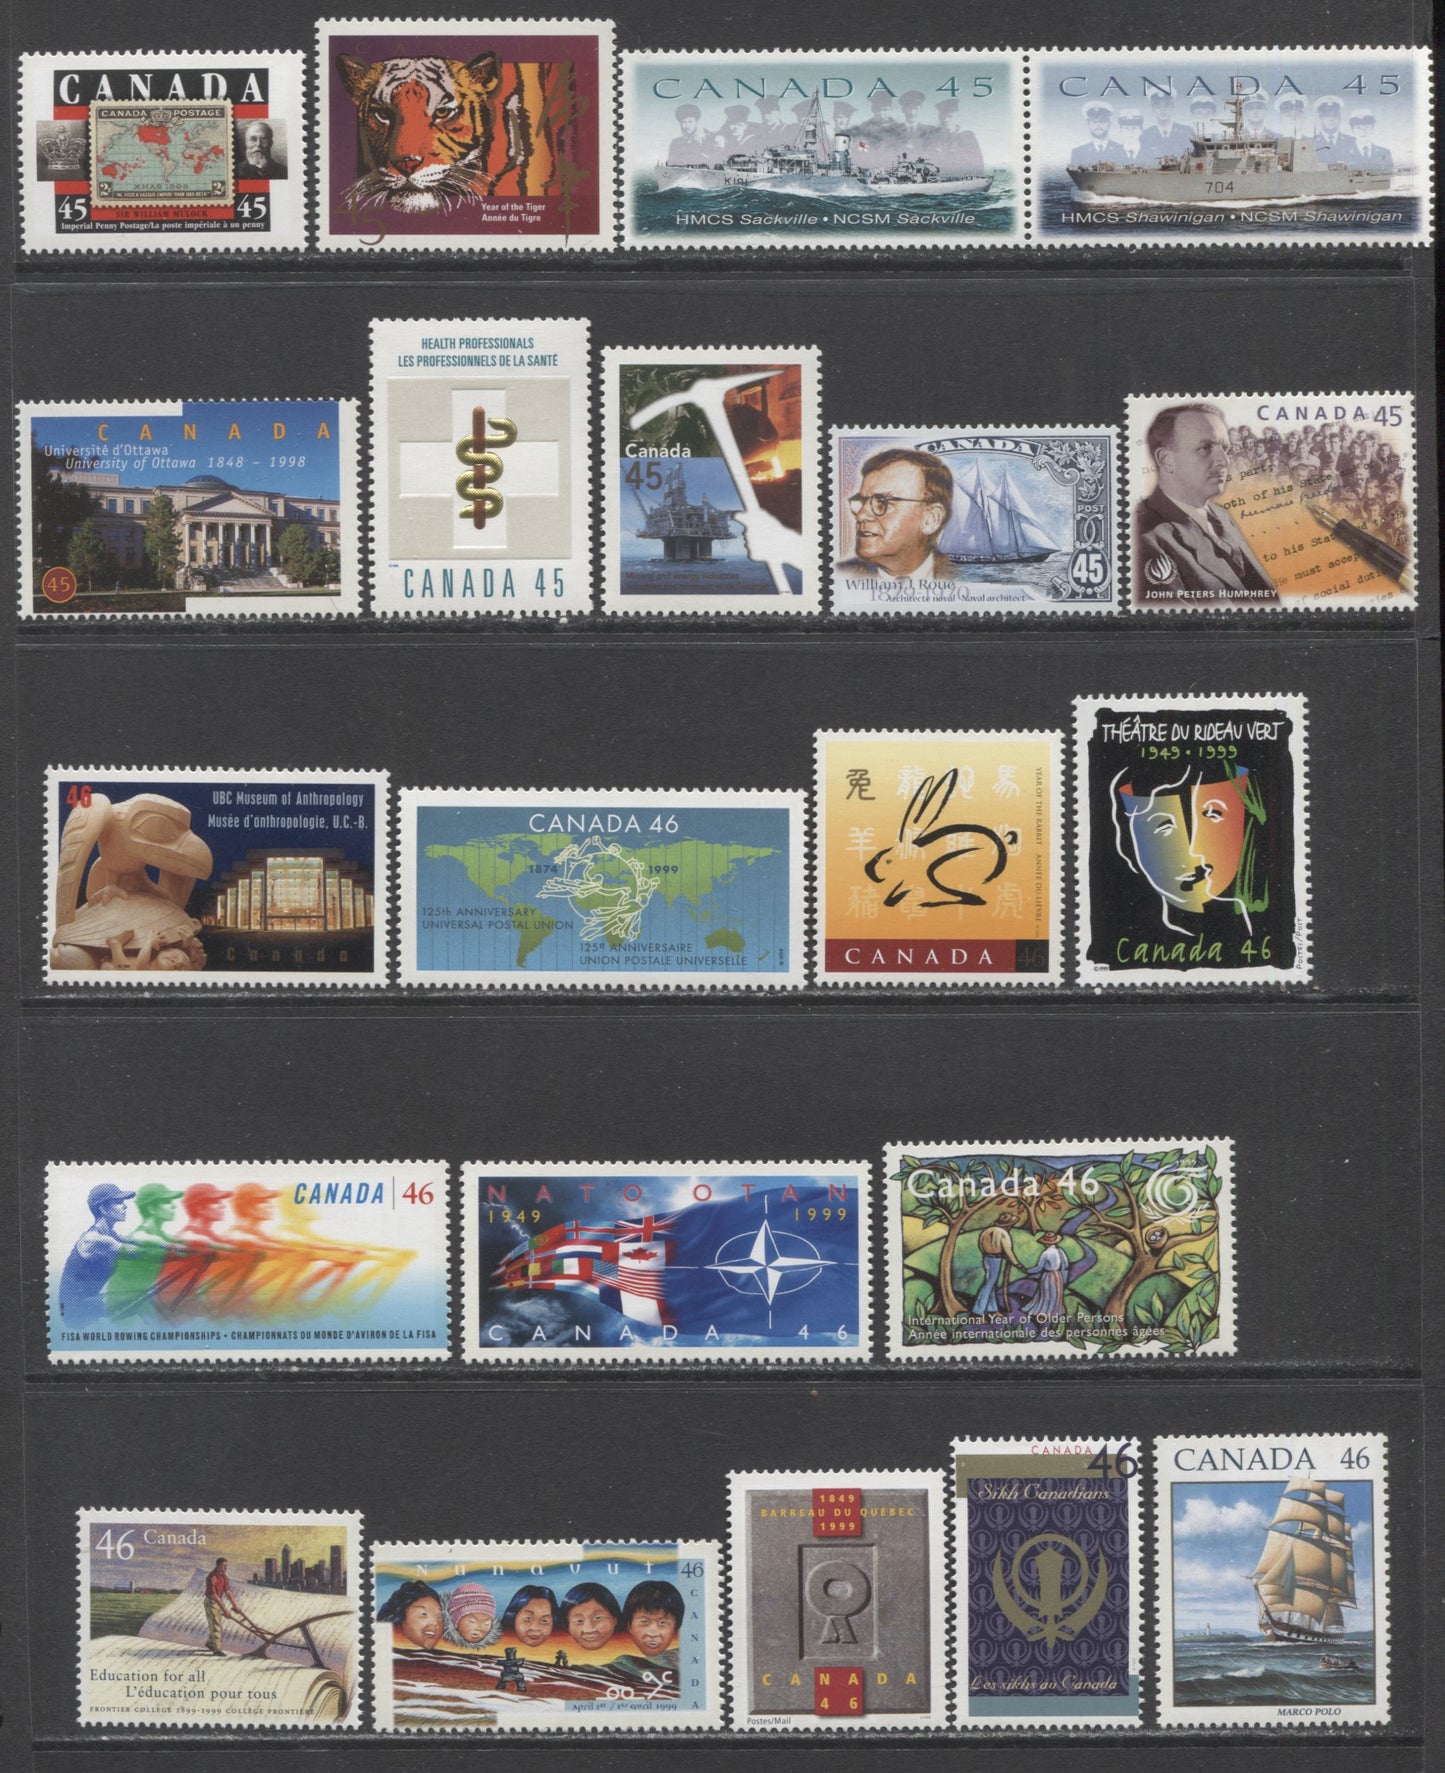 Lot 420 Canada #1708/1810 45c-46c Multicolored Tiger/Frontier College, 1998-1999 Commemoratives, 21 VFNH Singles & Pairs Includes Bright Phosphor On #1735